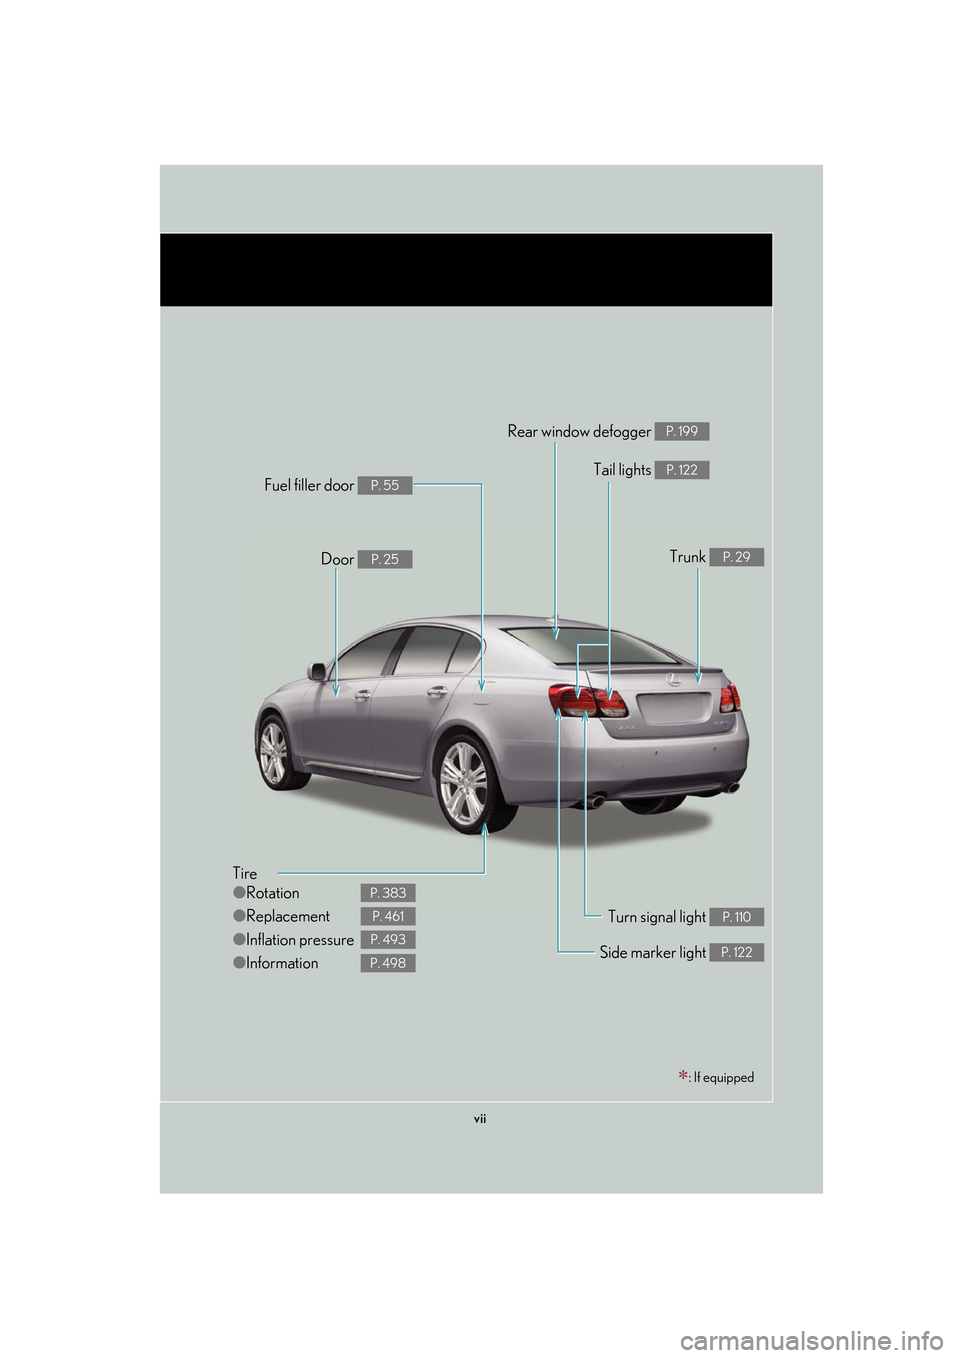 Lexus GS450h 2007  Using the hands-free system (for cellular phone) / LEXUS 2007 GS450H FROM JULY 2006 PROD. OWNERS MANUAL (OM30A05U) vii
Tire
●Rotation
● Replacement
● Inflation pressure
● Information
P. 383
P. 461
P. 493
P. 498
Tail lights P. 122
Side marker light P. 122
Trunk P. 29
Rear window defogger P. 199
Door P. 25
F